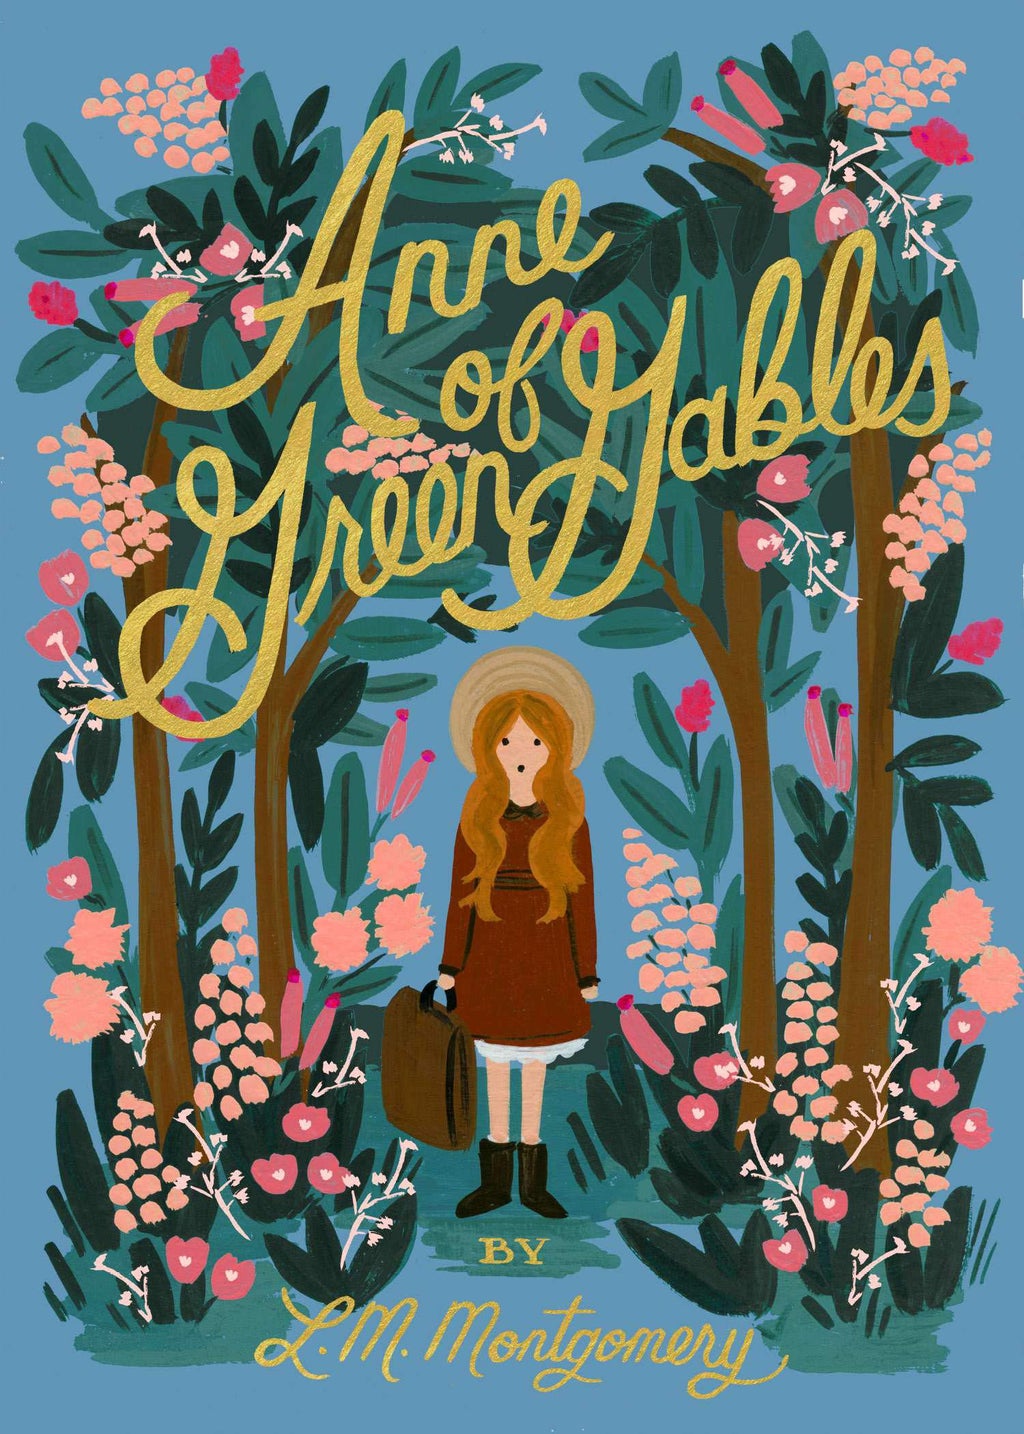 Cover of “Anne of Green Gables”, by L.M. Montgomery